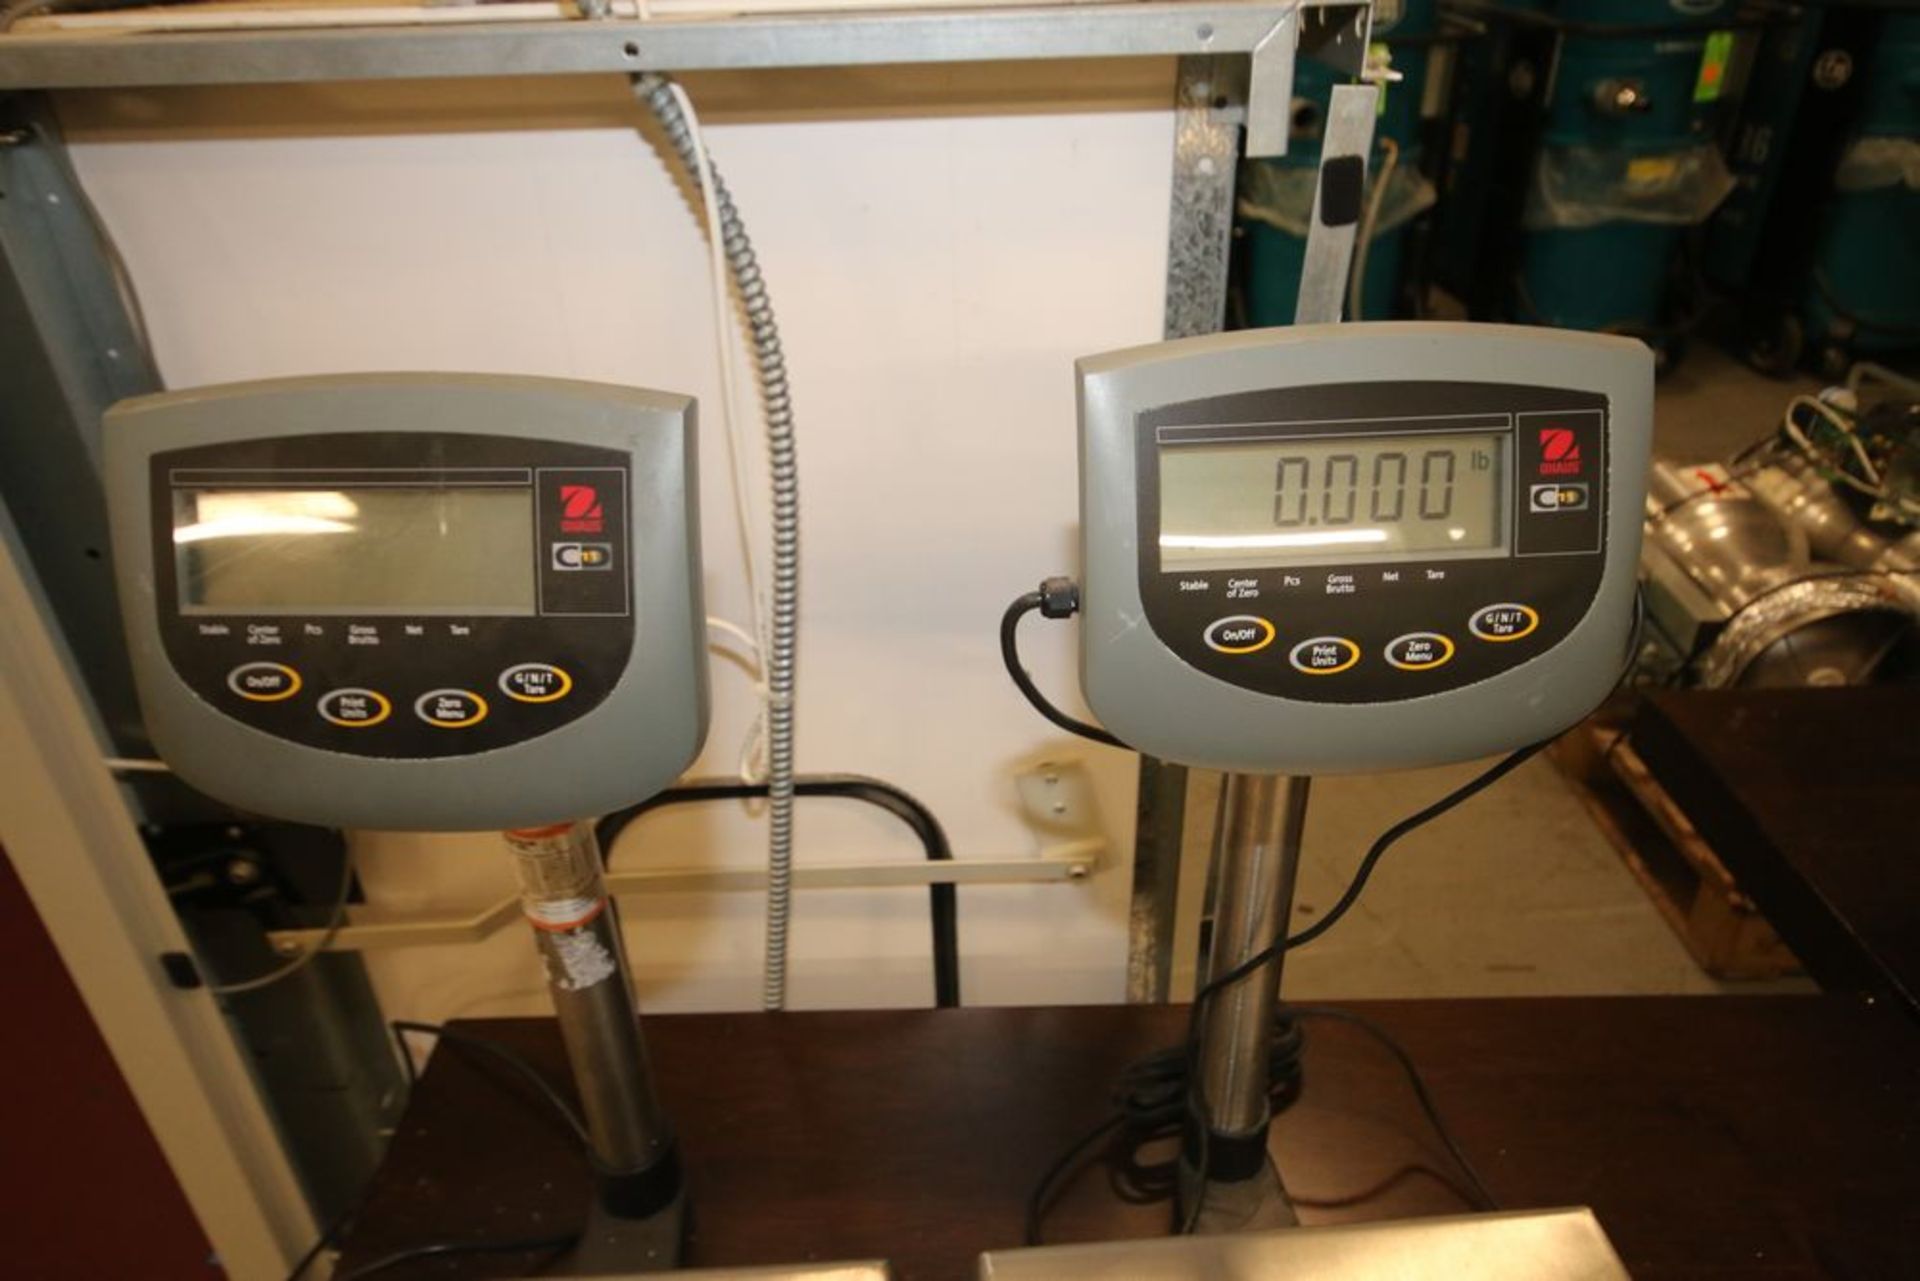 Ohaus S/S Digital Platform Scales, M/N CD-11, with Aprox. 14" L x 12" W S/S Platforms, with - Image 3 of 4